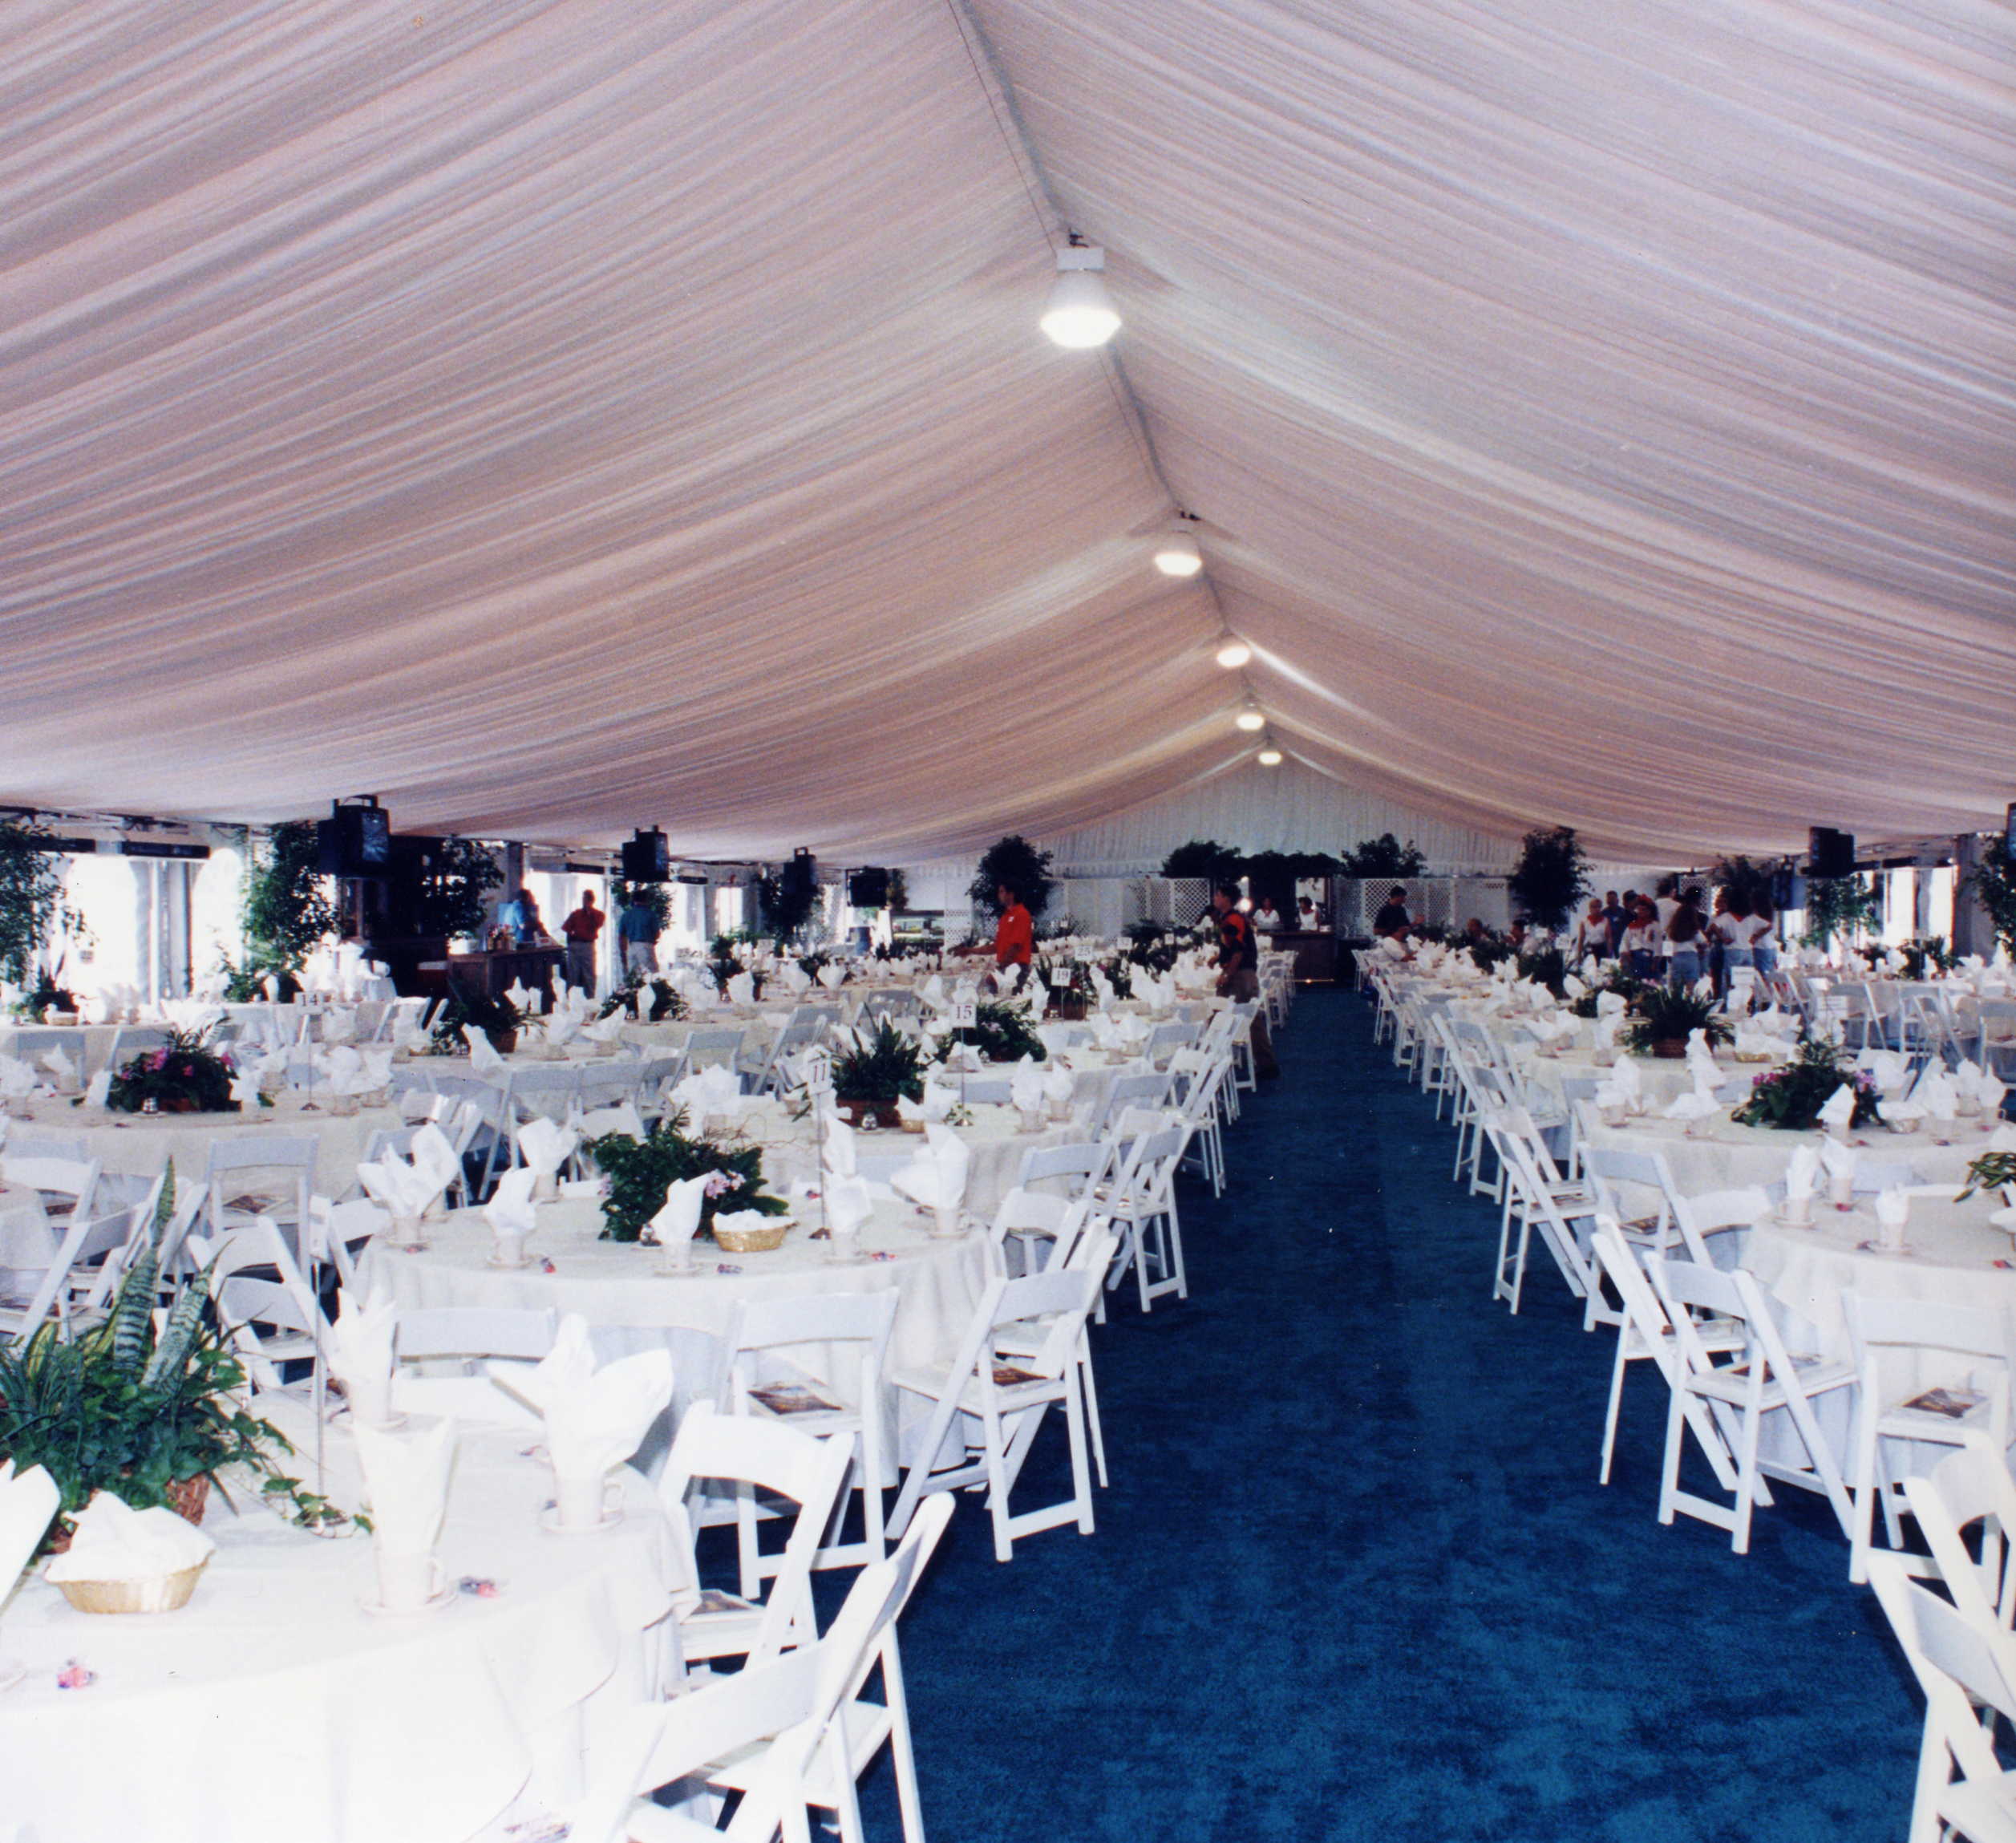 Ceiling Designs For Your Wedding Tent Decorations American